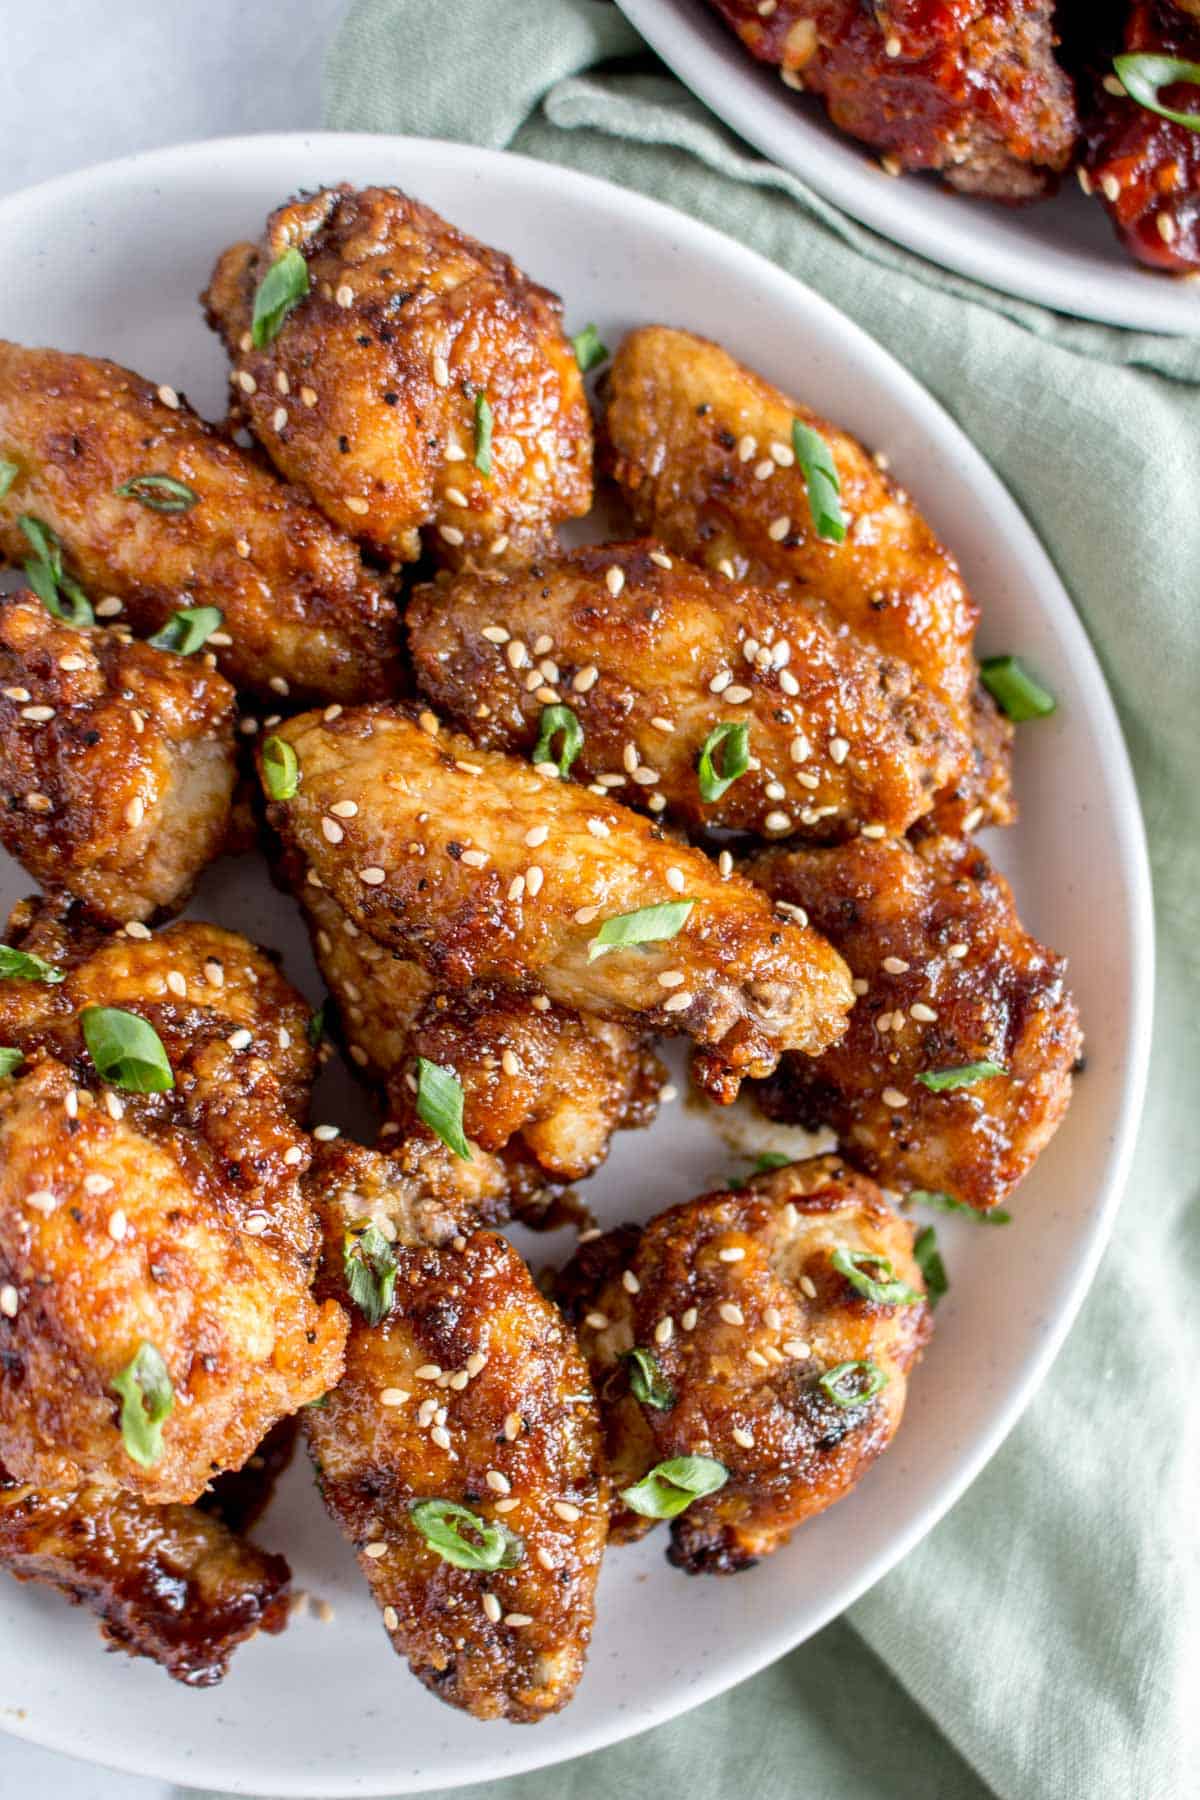 Close up of a plate of Korean air fryer chicken wings coated in a soy garlic glaze.